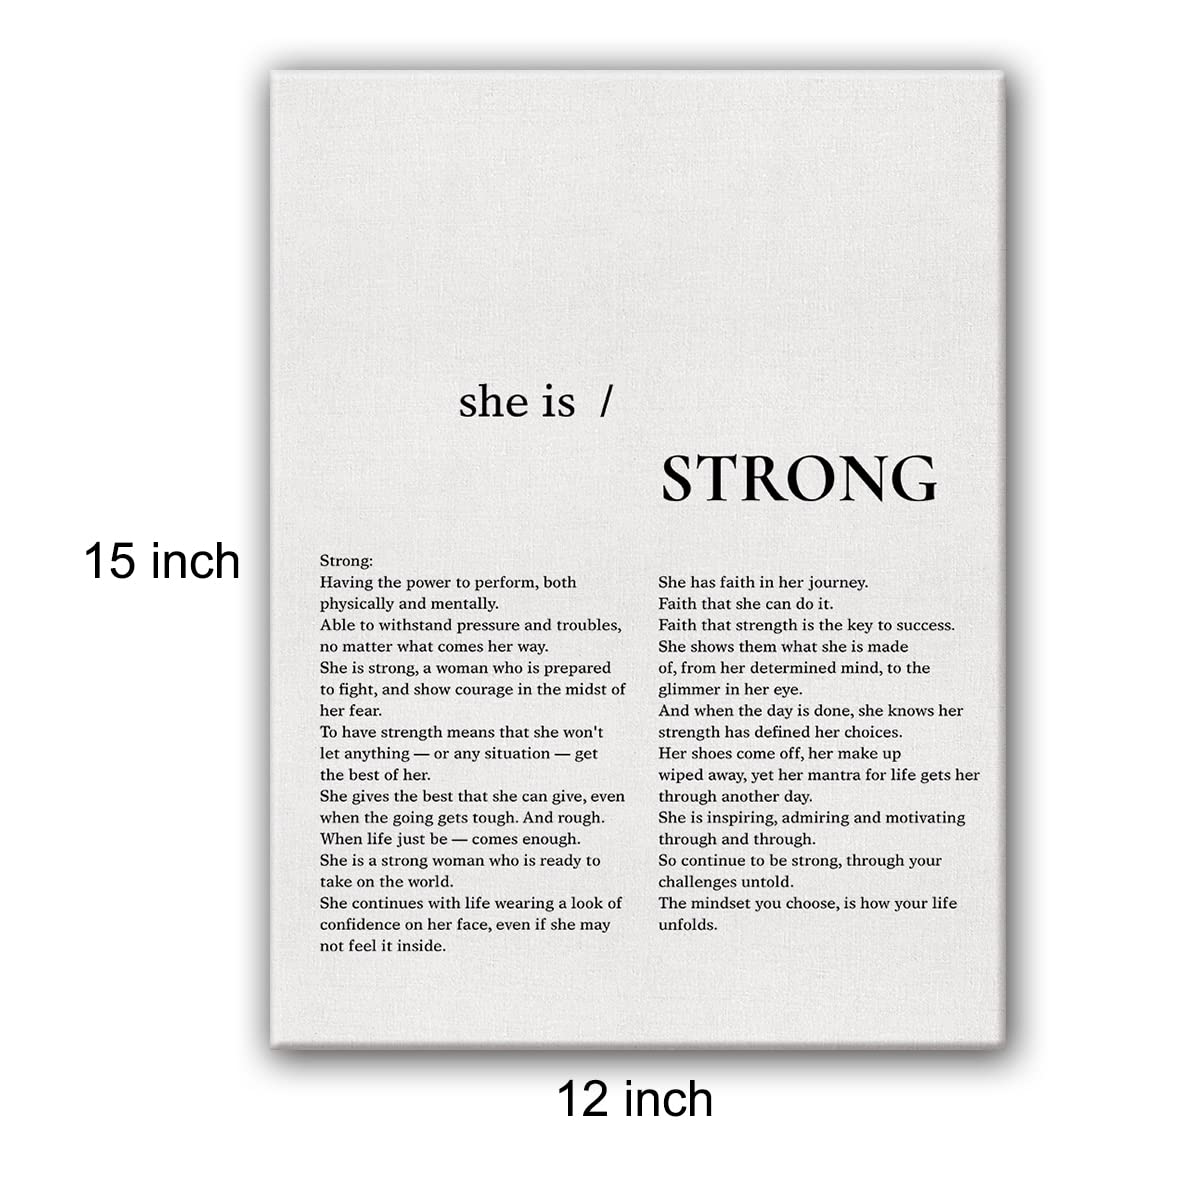 Yuzi-n Inspirational She is Strong Print Poster Painting Canvas Wall Art & Tabletop Decoration Home Office Artwork for Woman, Easel & Hanging Hook 12x15Inch